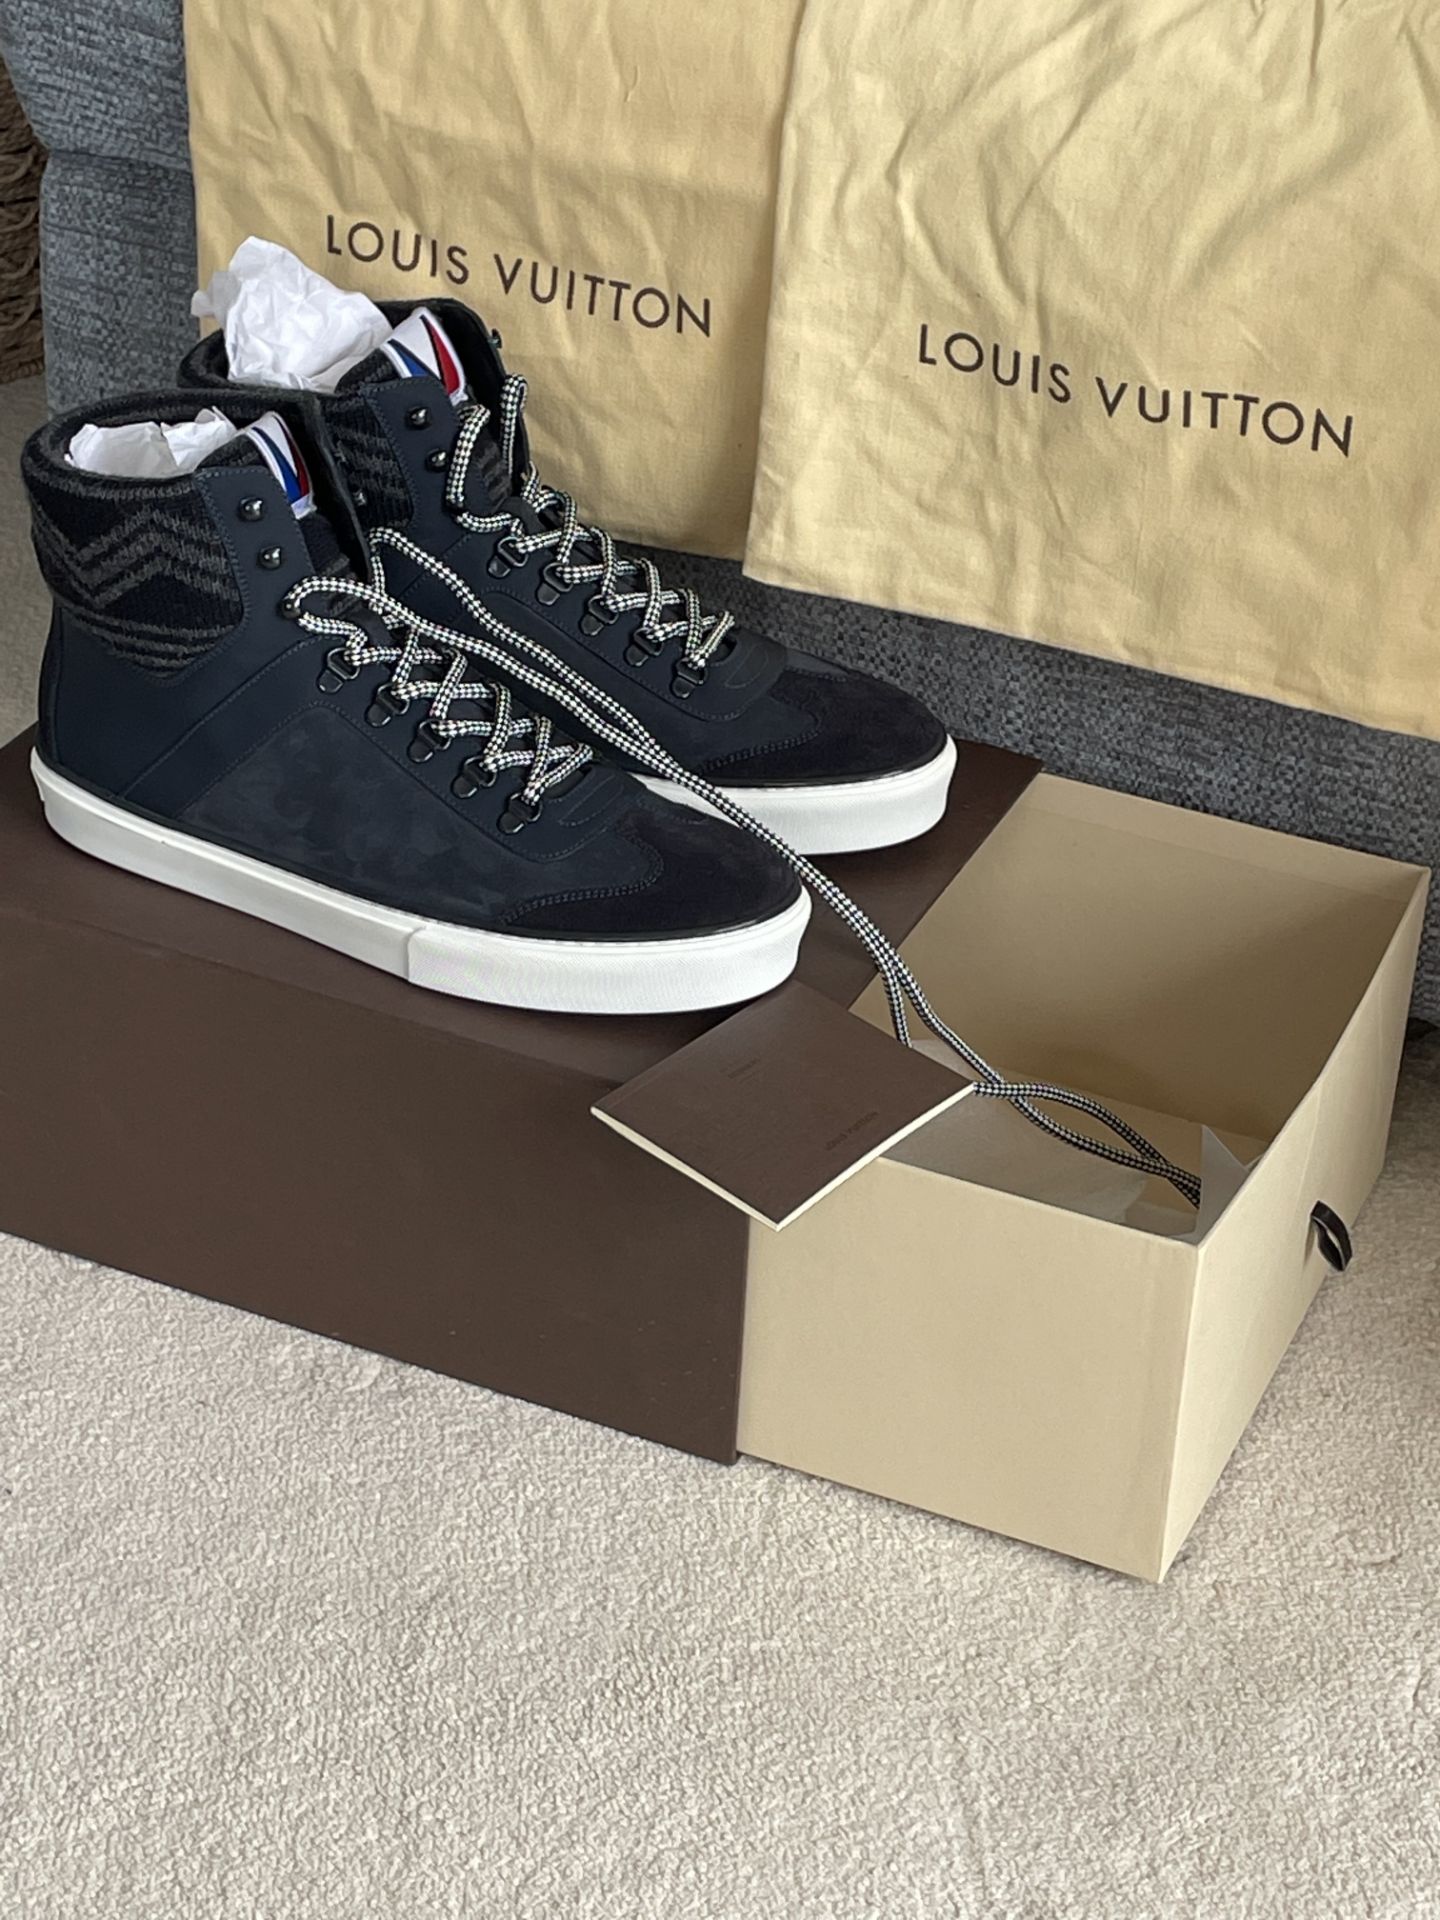 Louis Vuitton Trainers Size 9 - Image 2 of 6